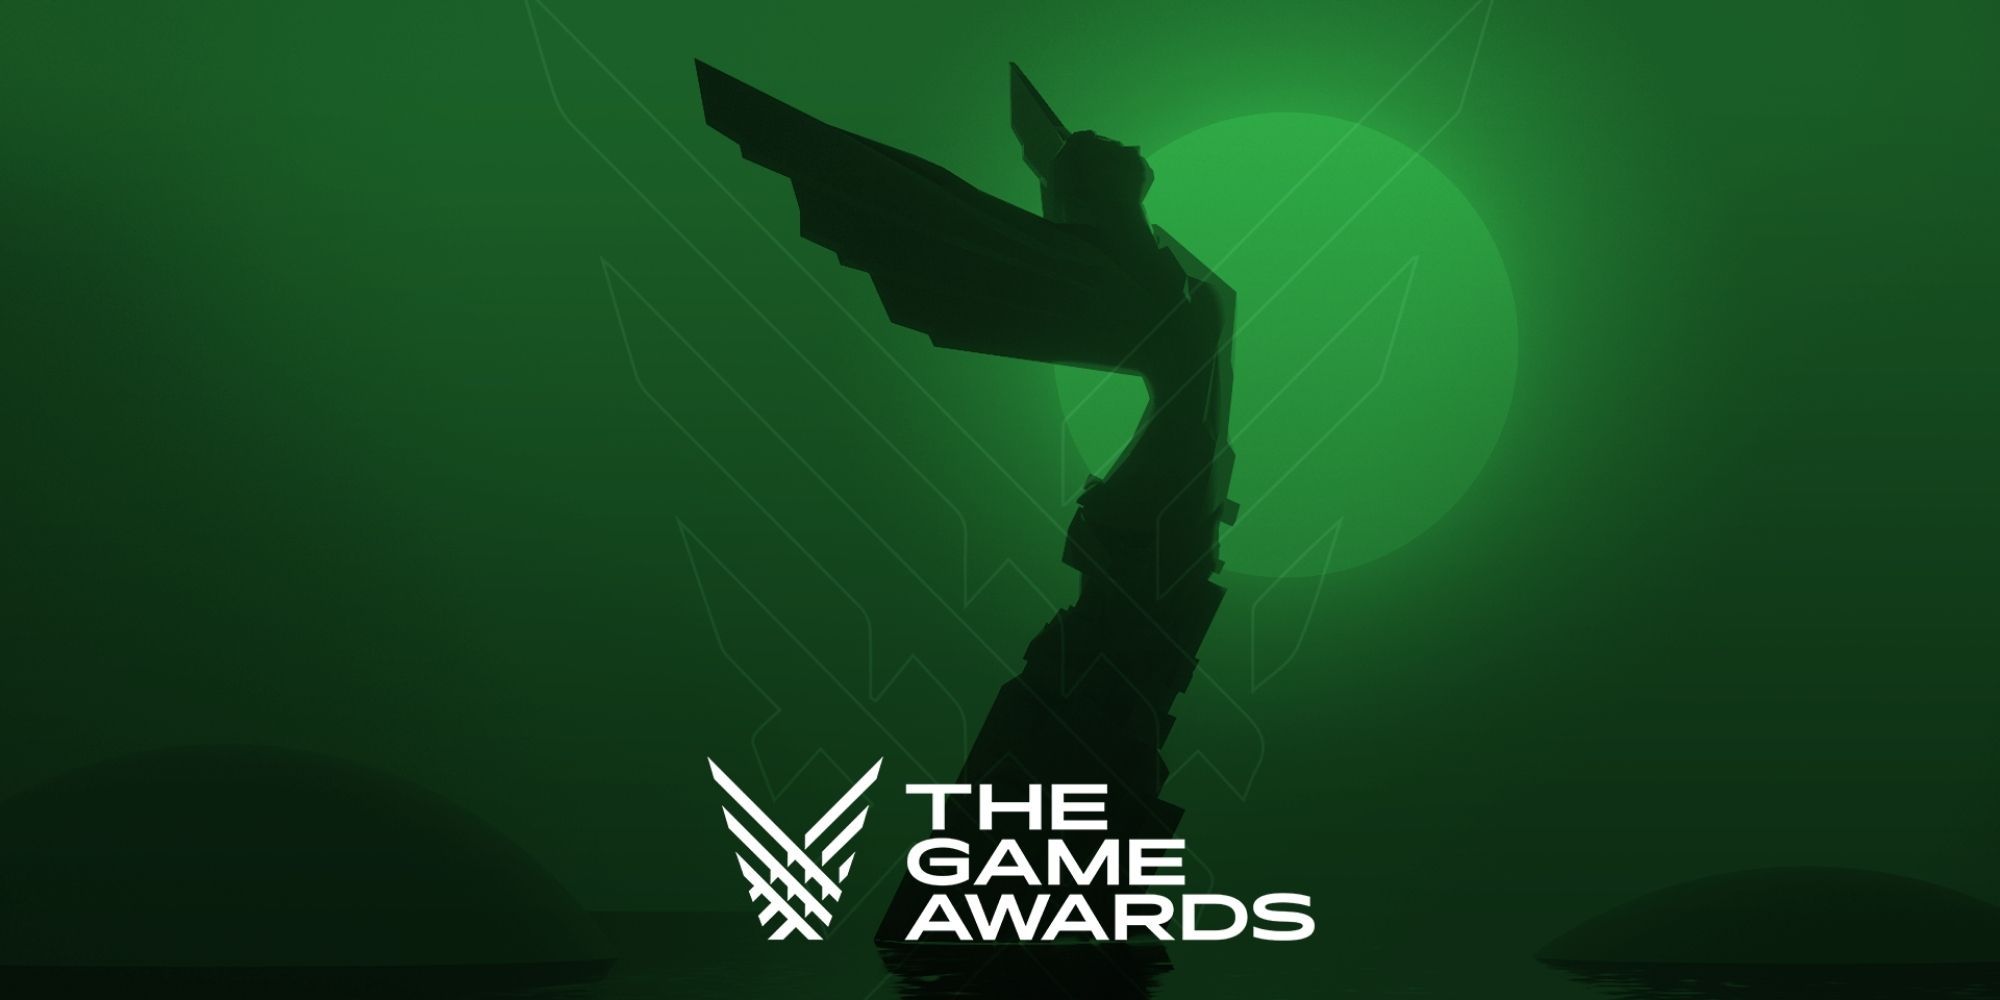 The Game Awards return December 8th with a new category for